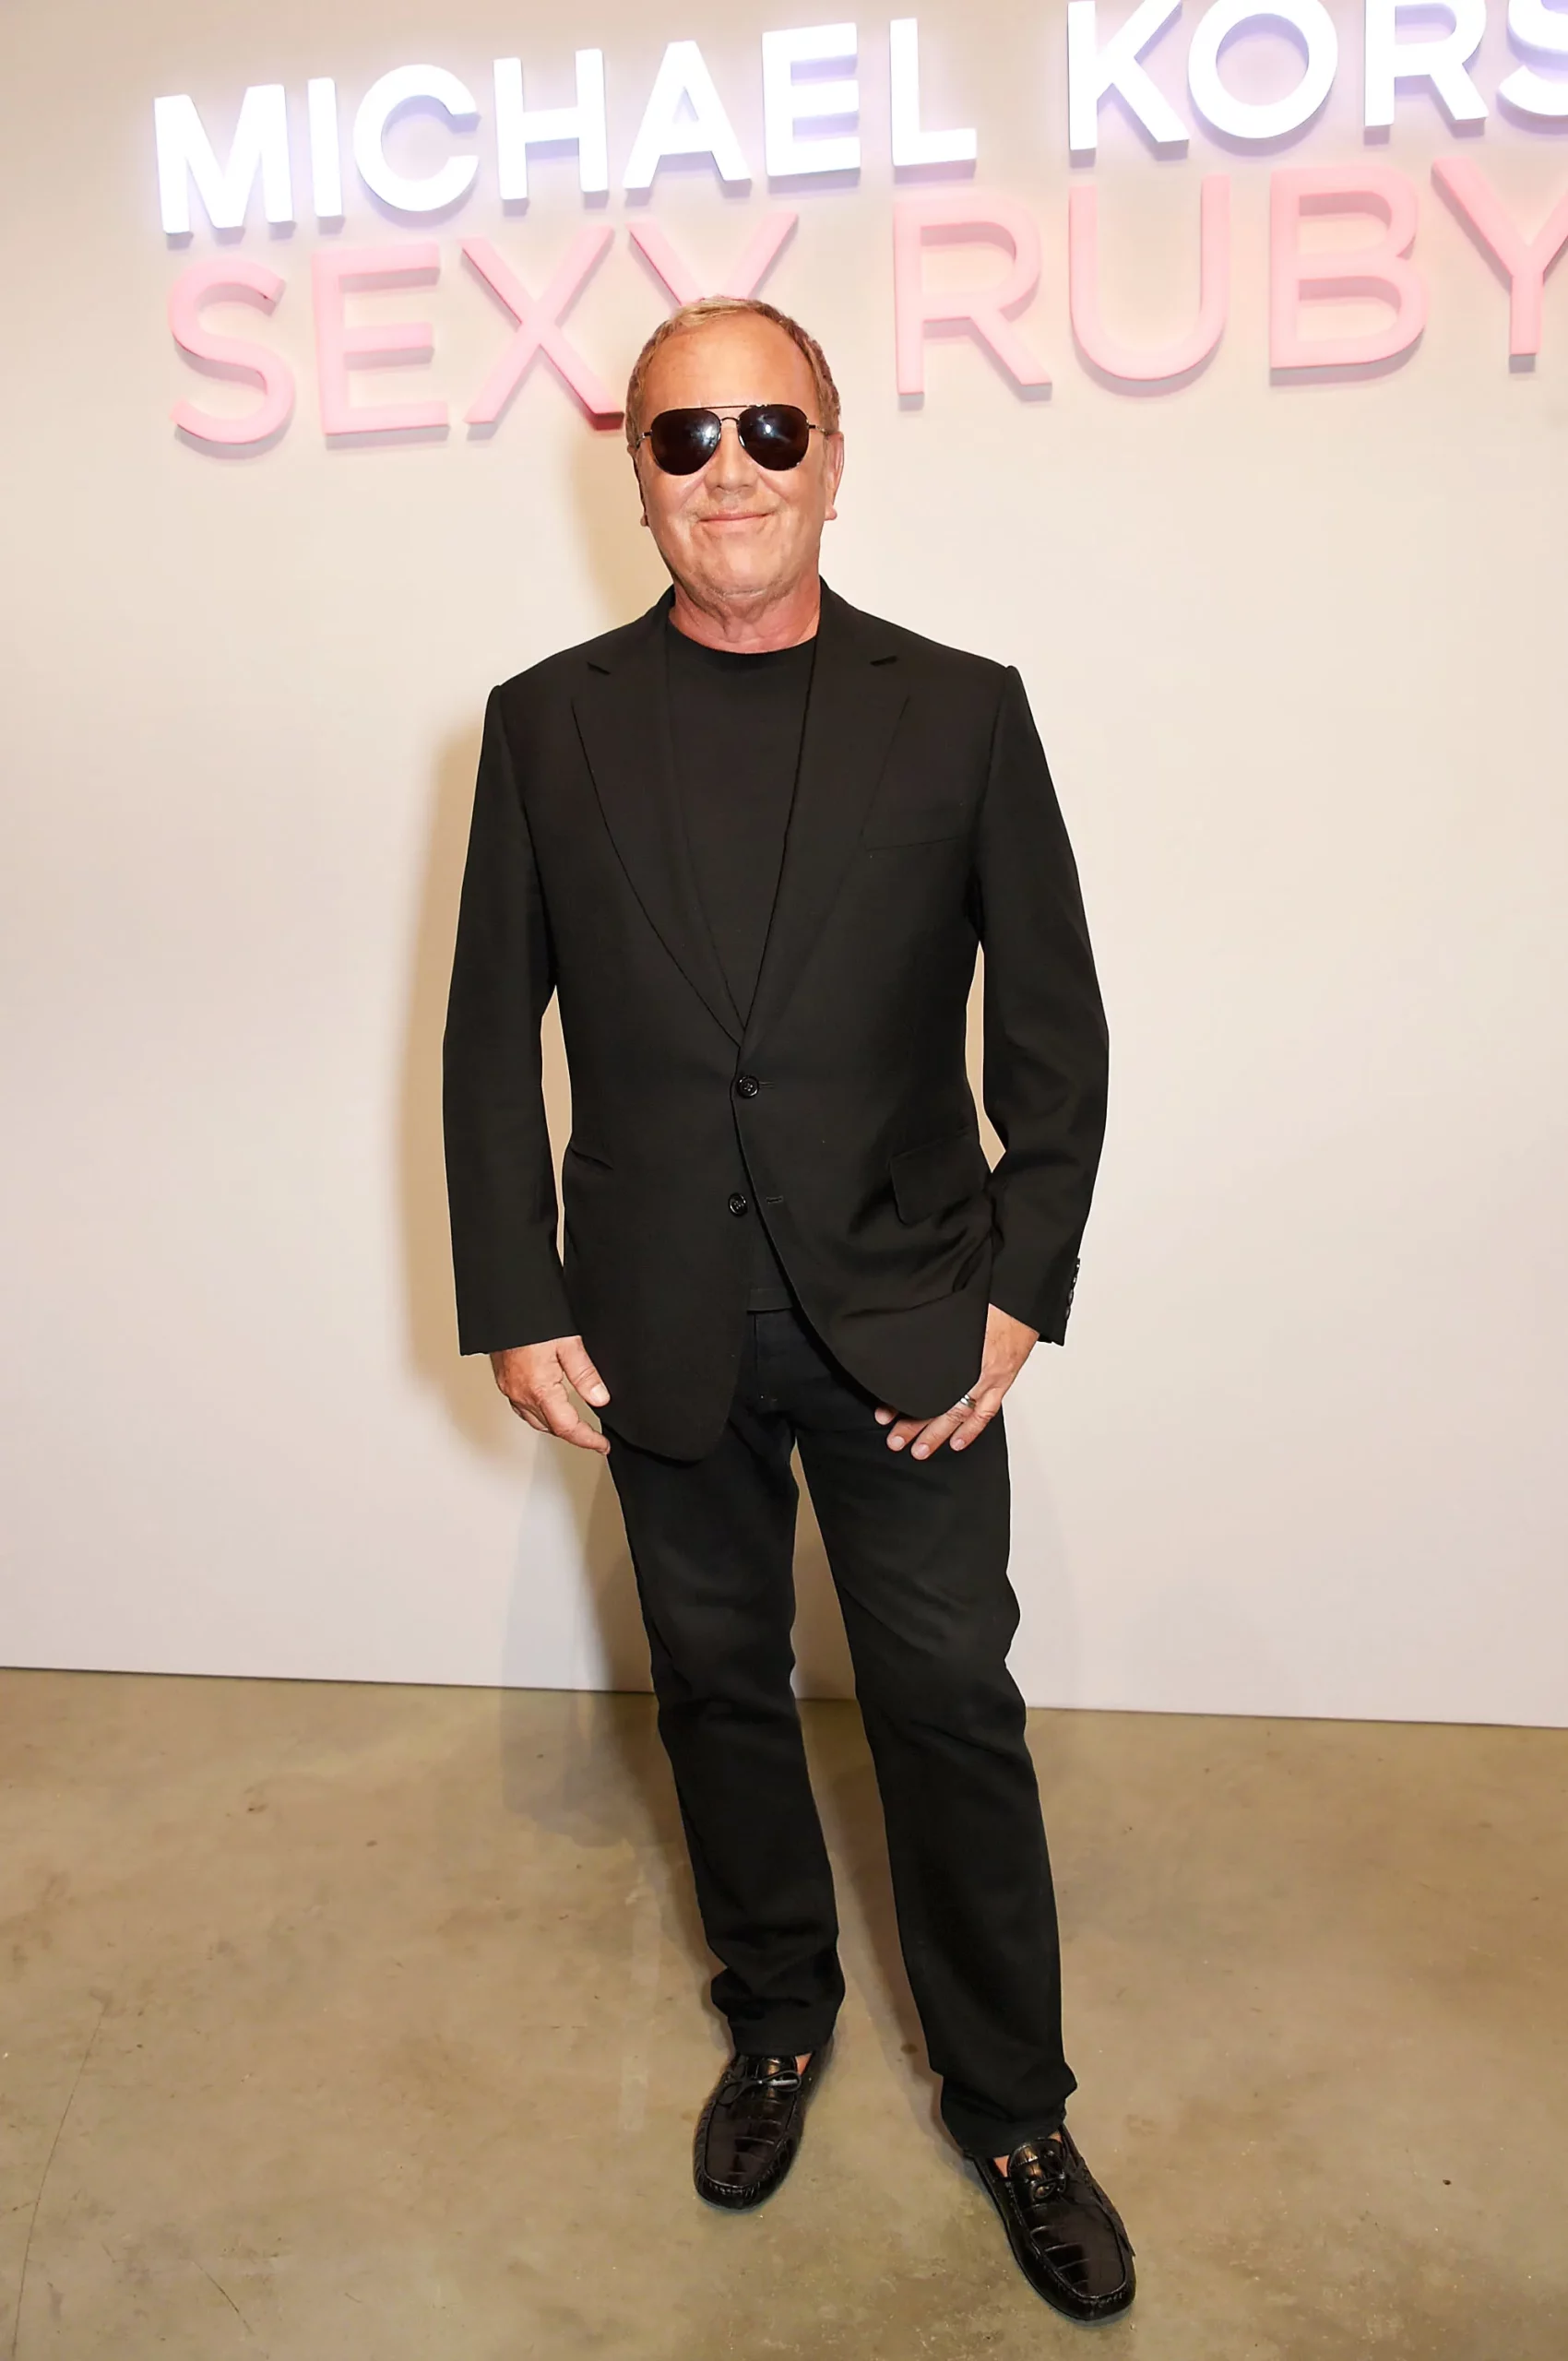 Michael Kors 039Makes it Work039 as Newly Traded IPO  Business Chief  North America